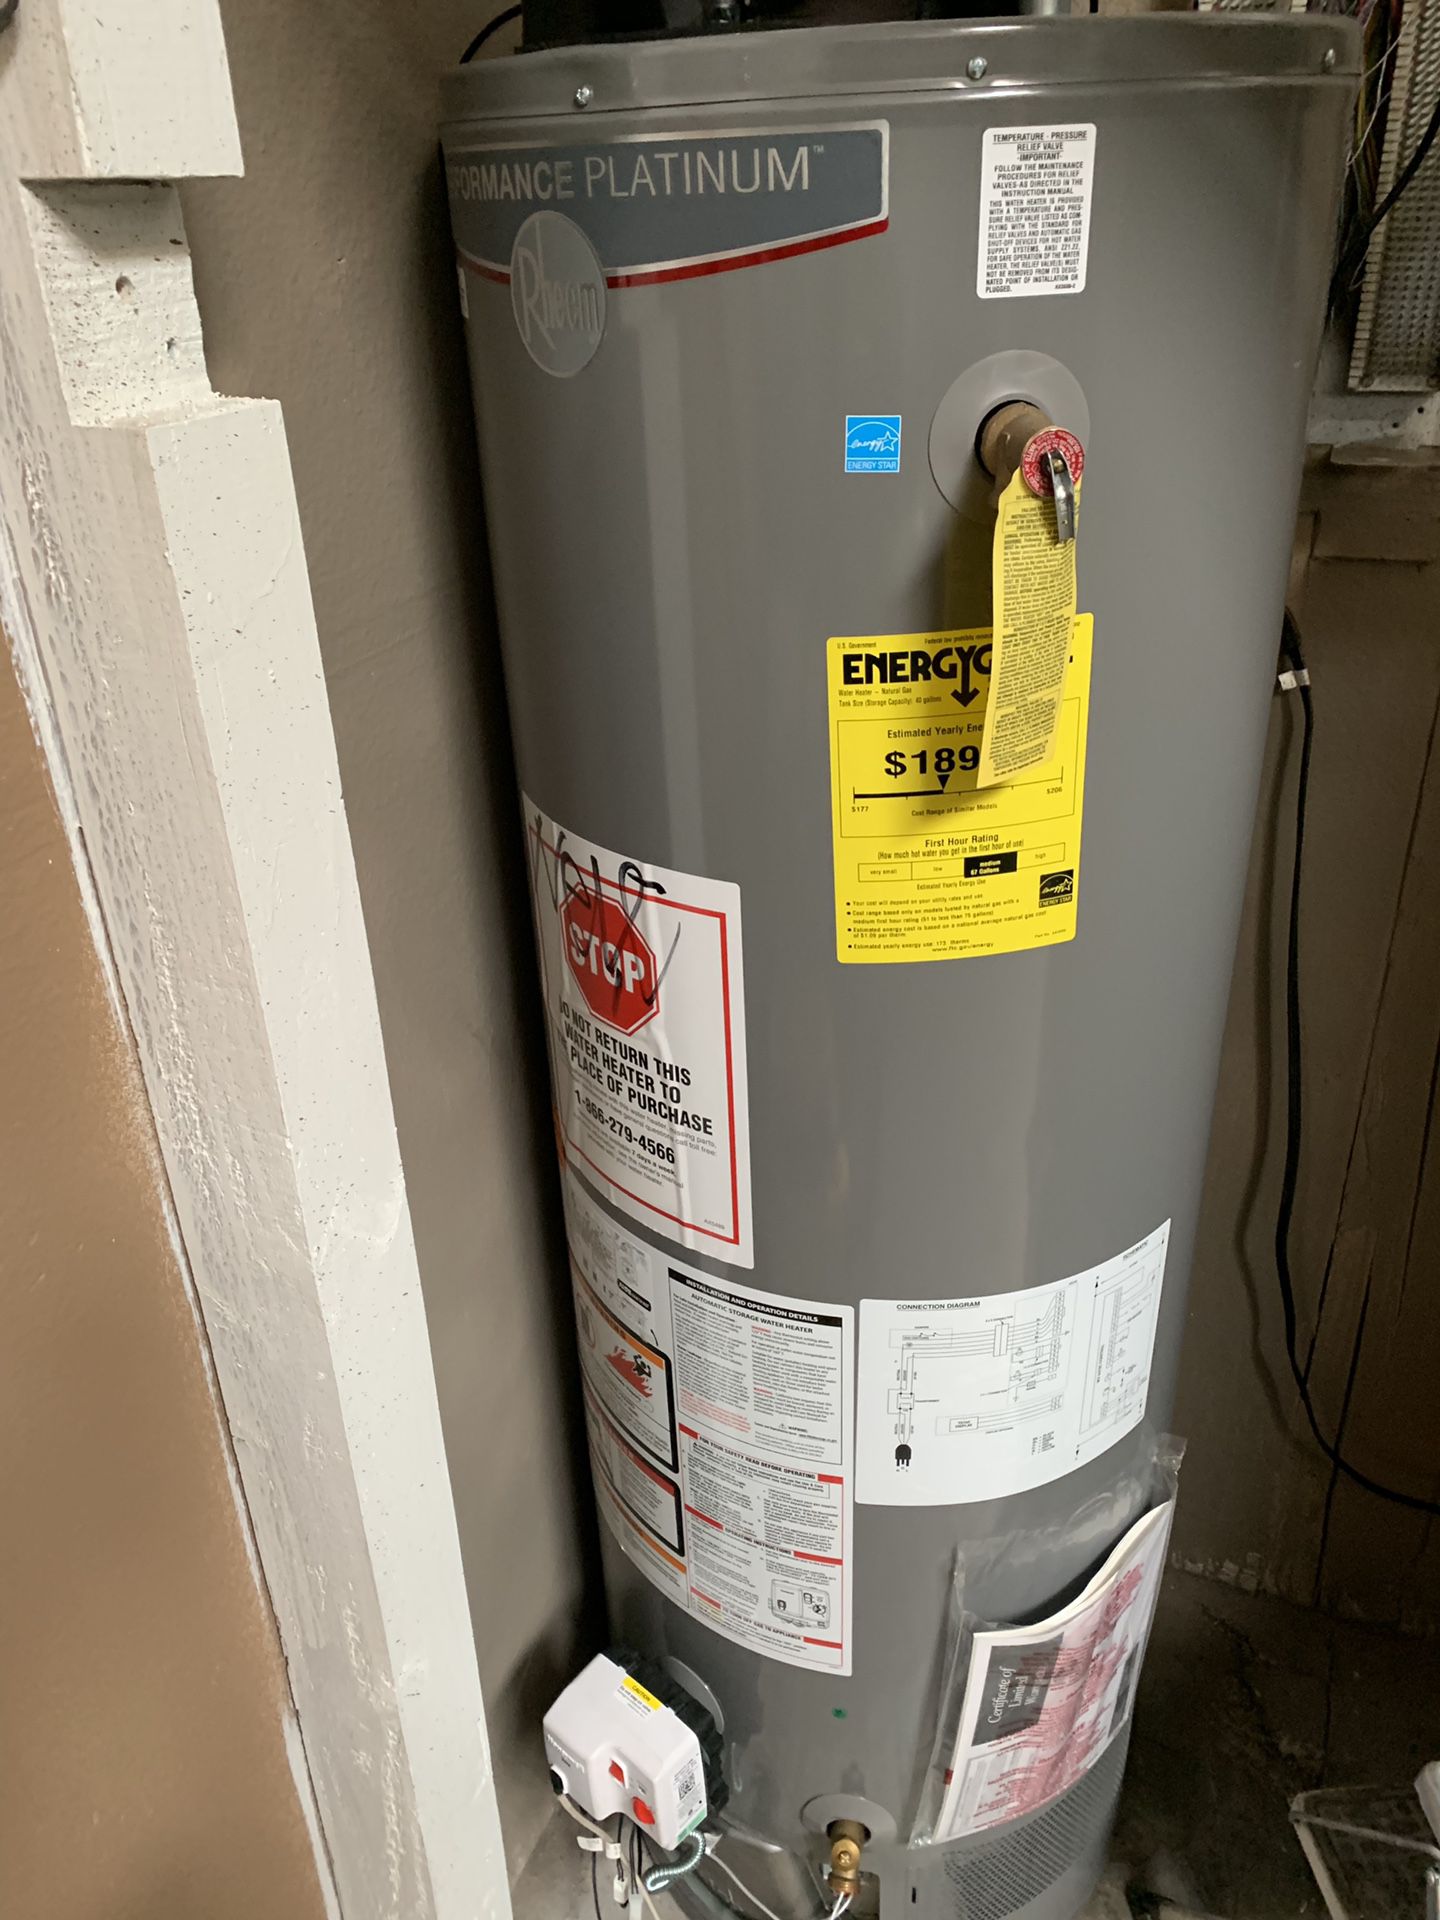 Rheem new water heater promo price includes installation and haul away ‼️‼️